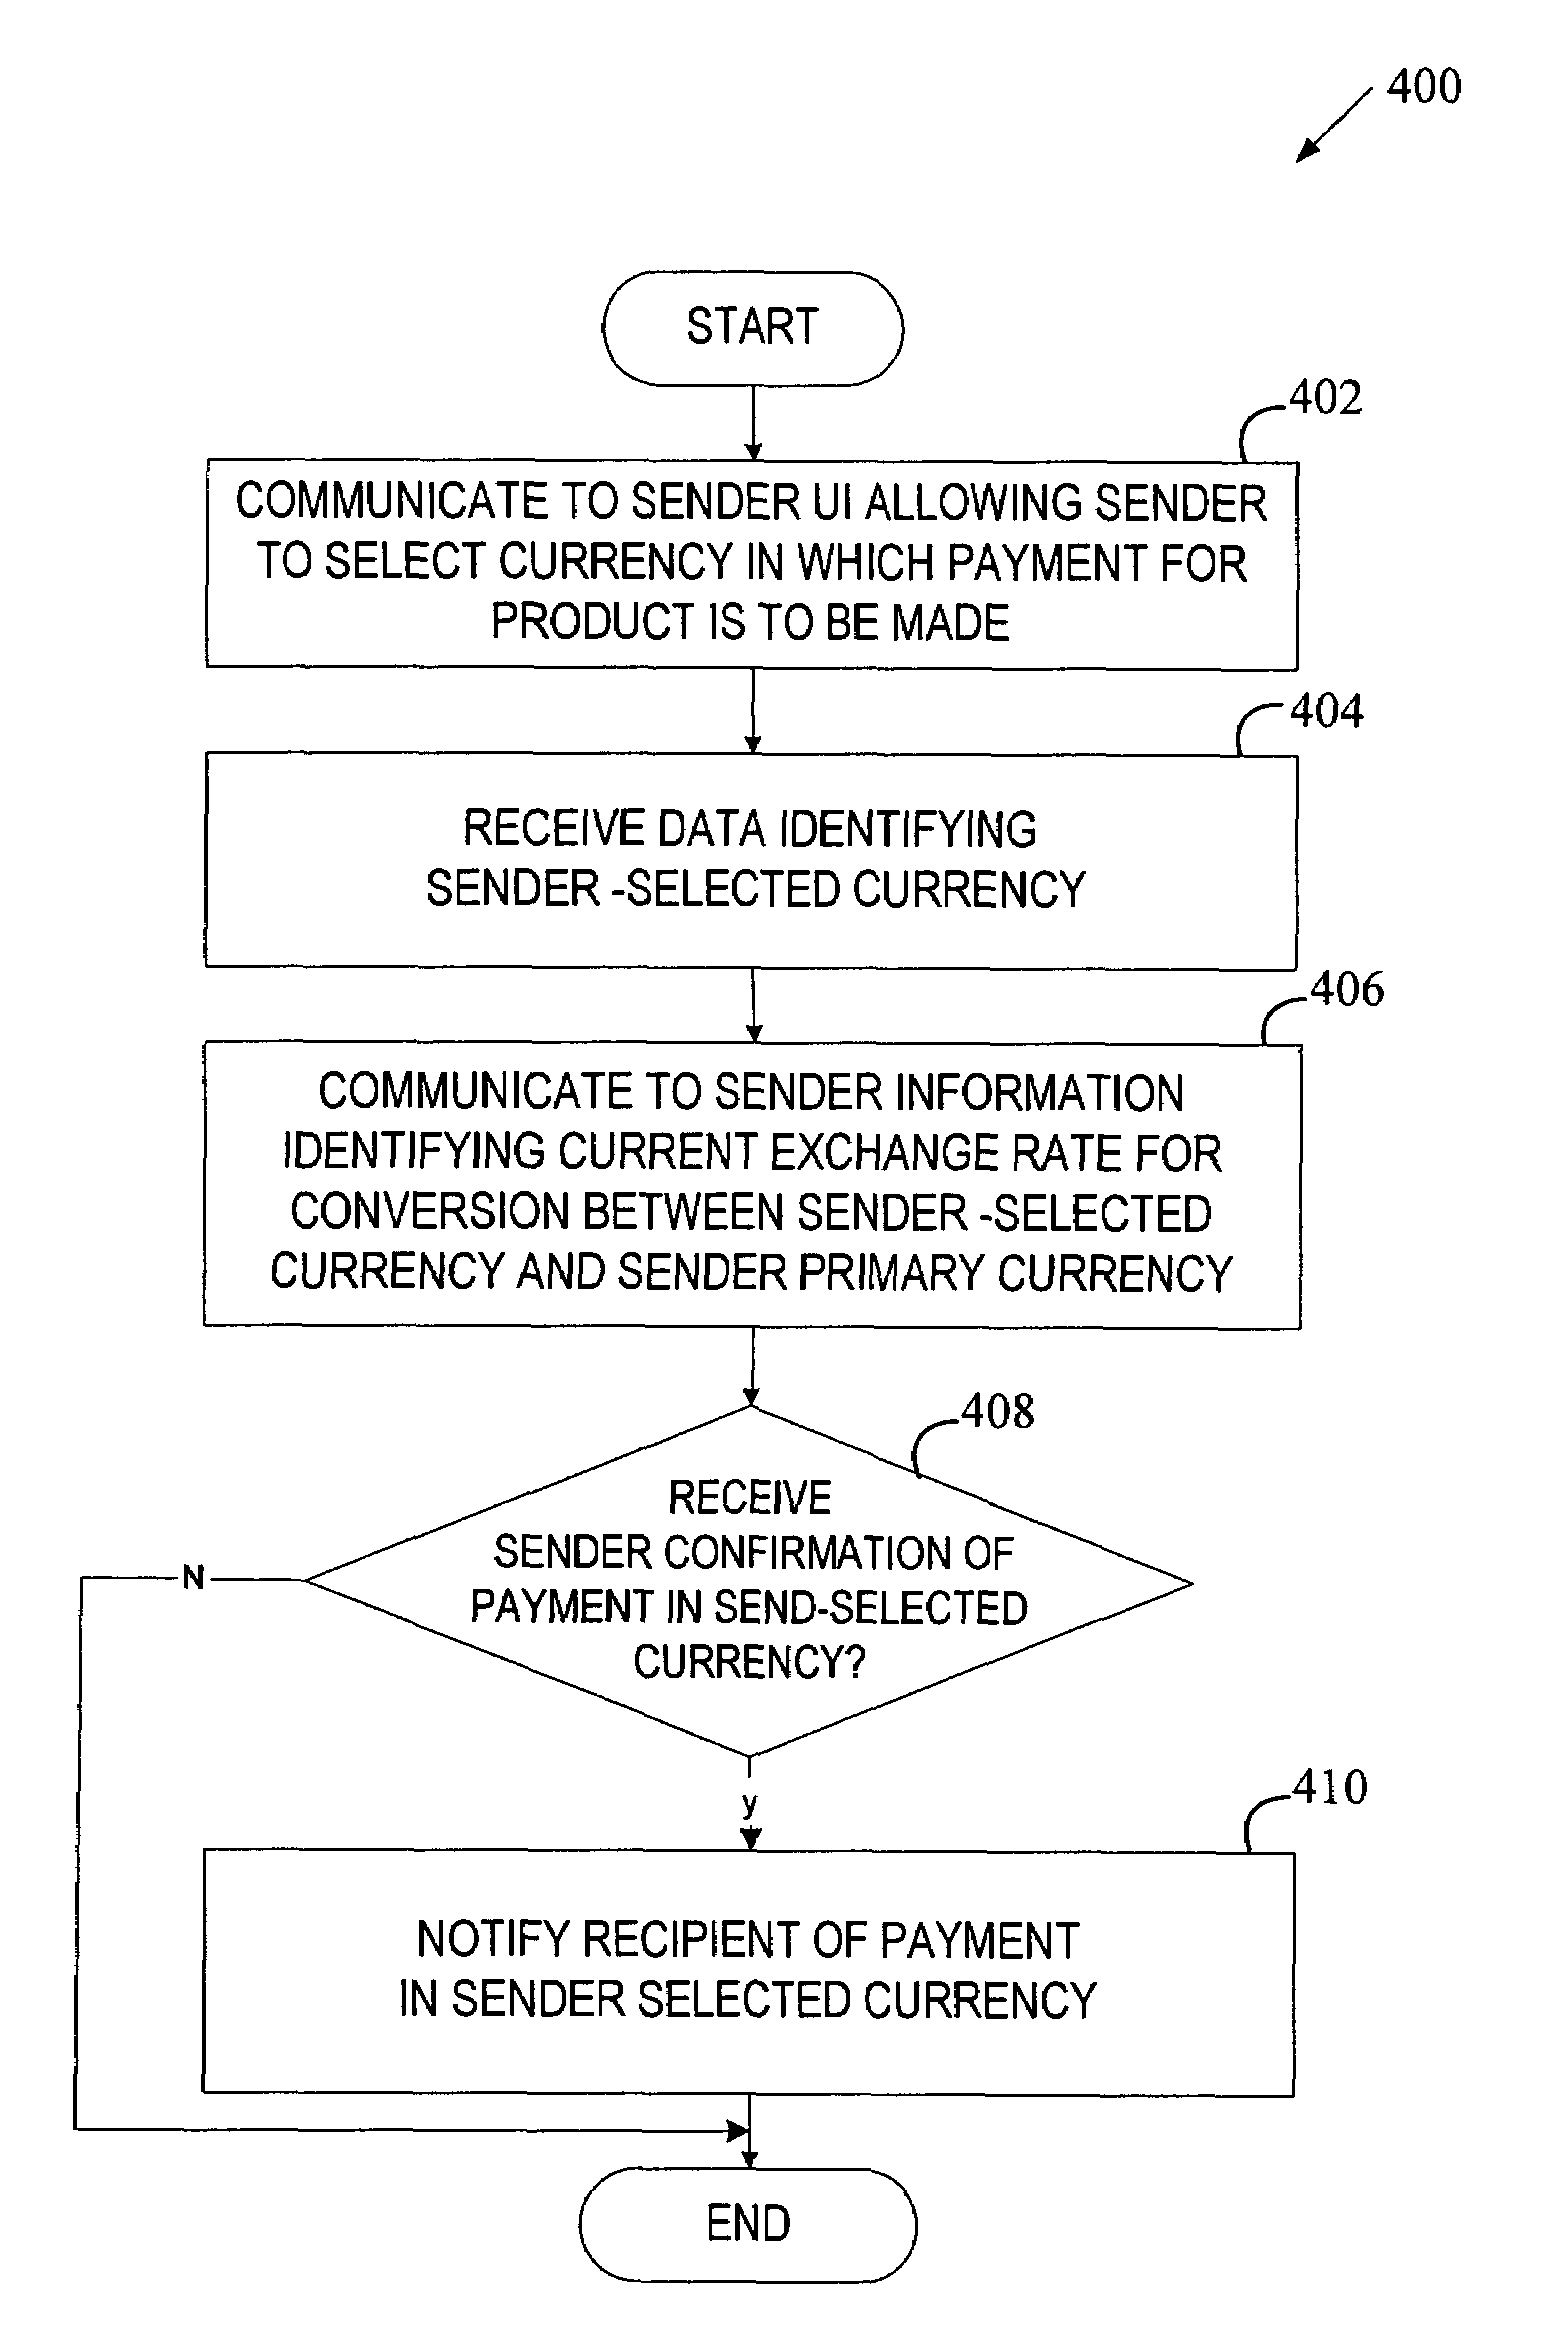 Multicurrency exchanges between participants of a network-based transaction facility